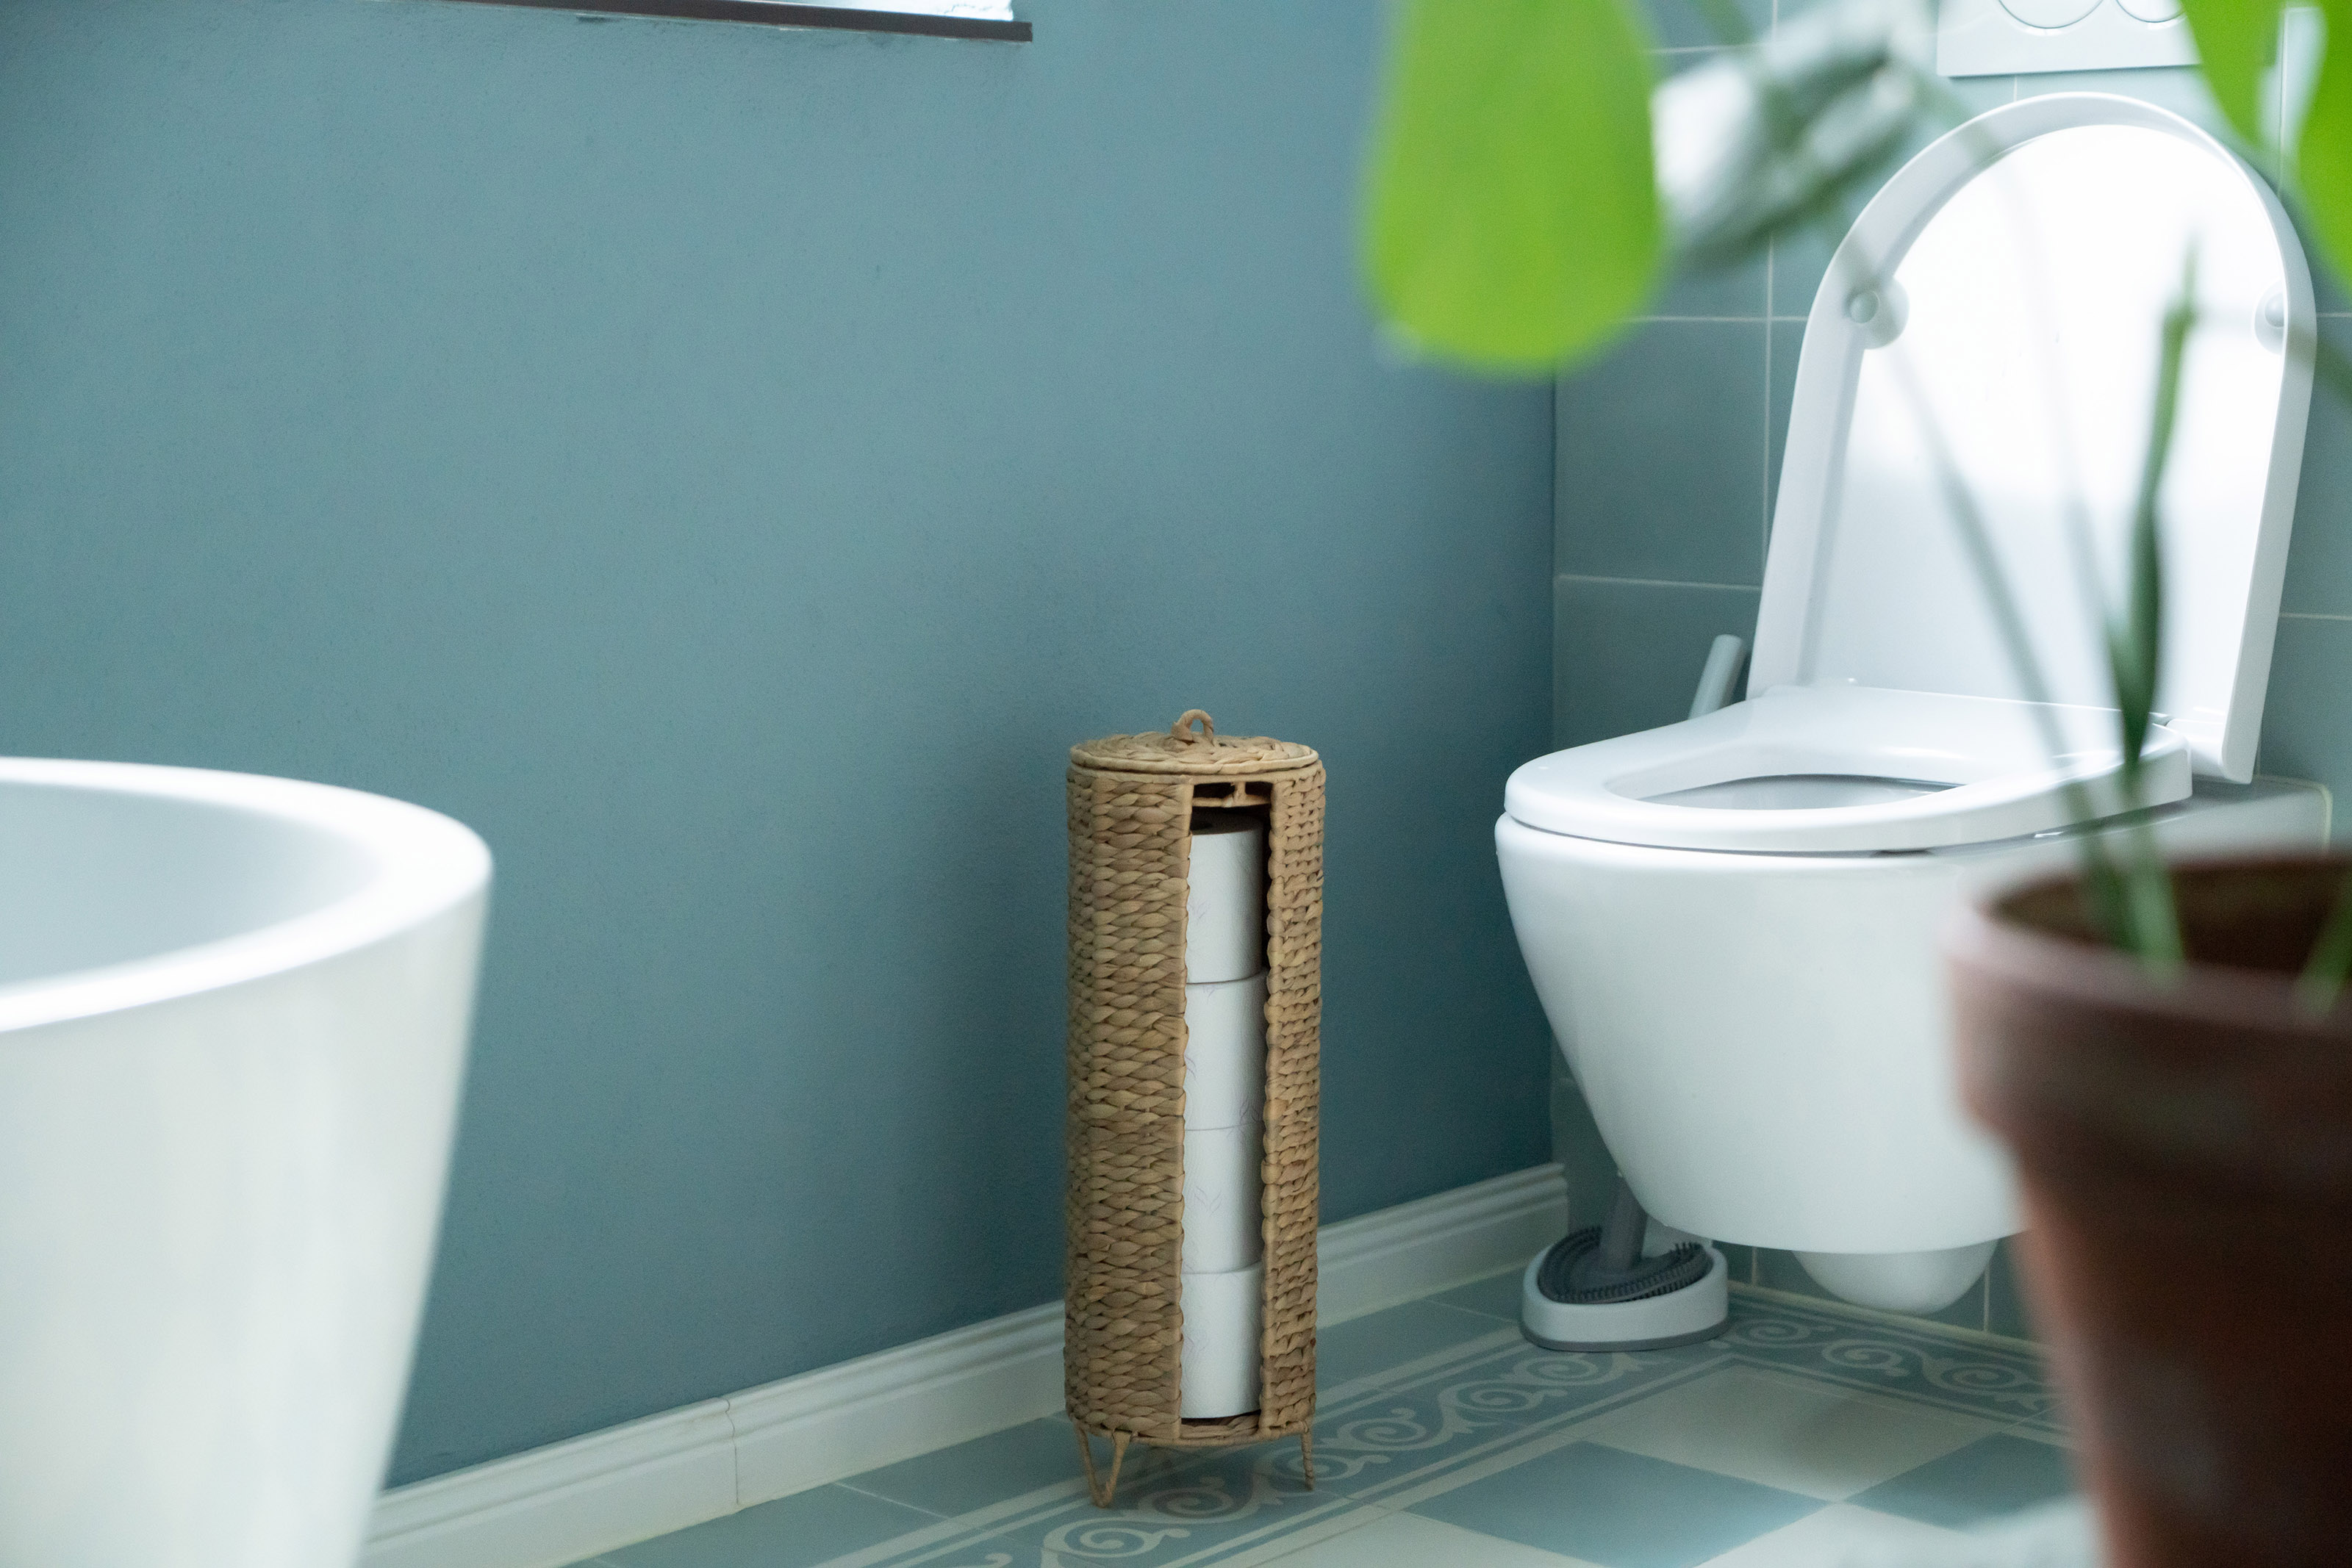 Toilet paper storage for 4 toilet rolls, woven water hyacinth